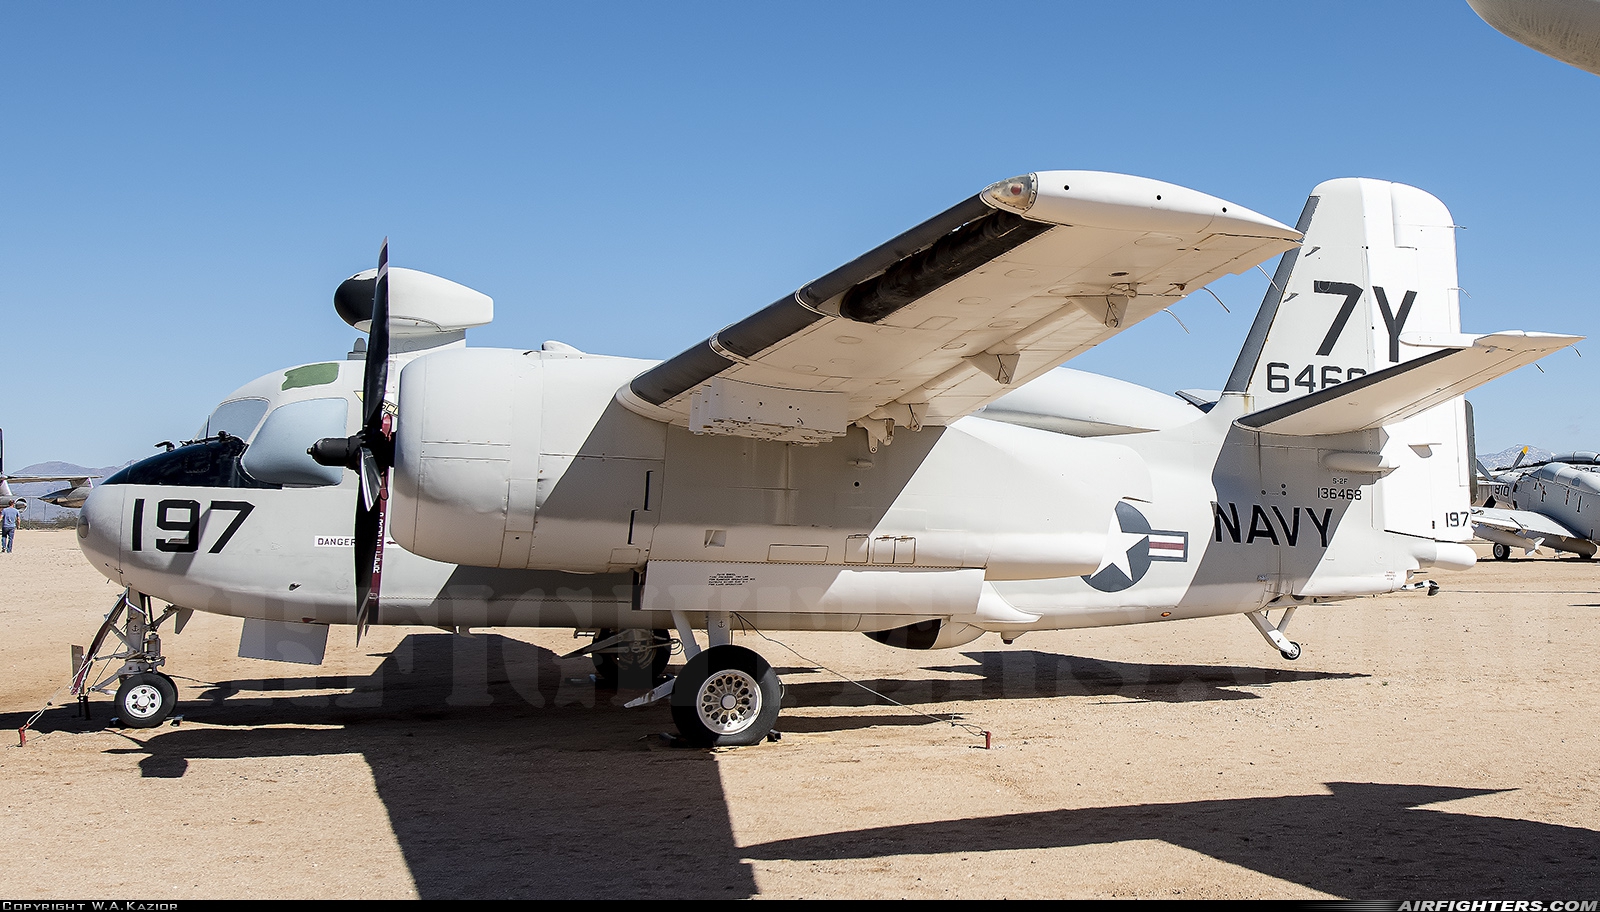 USA - Navy Grumman S-2F Tracker (G-89/S2F-1S1) 136468 at Tucson - Pima Air and Space Museum, USA